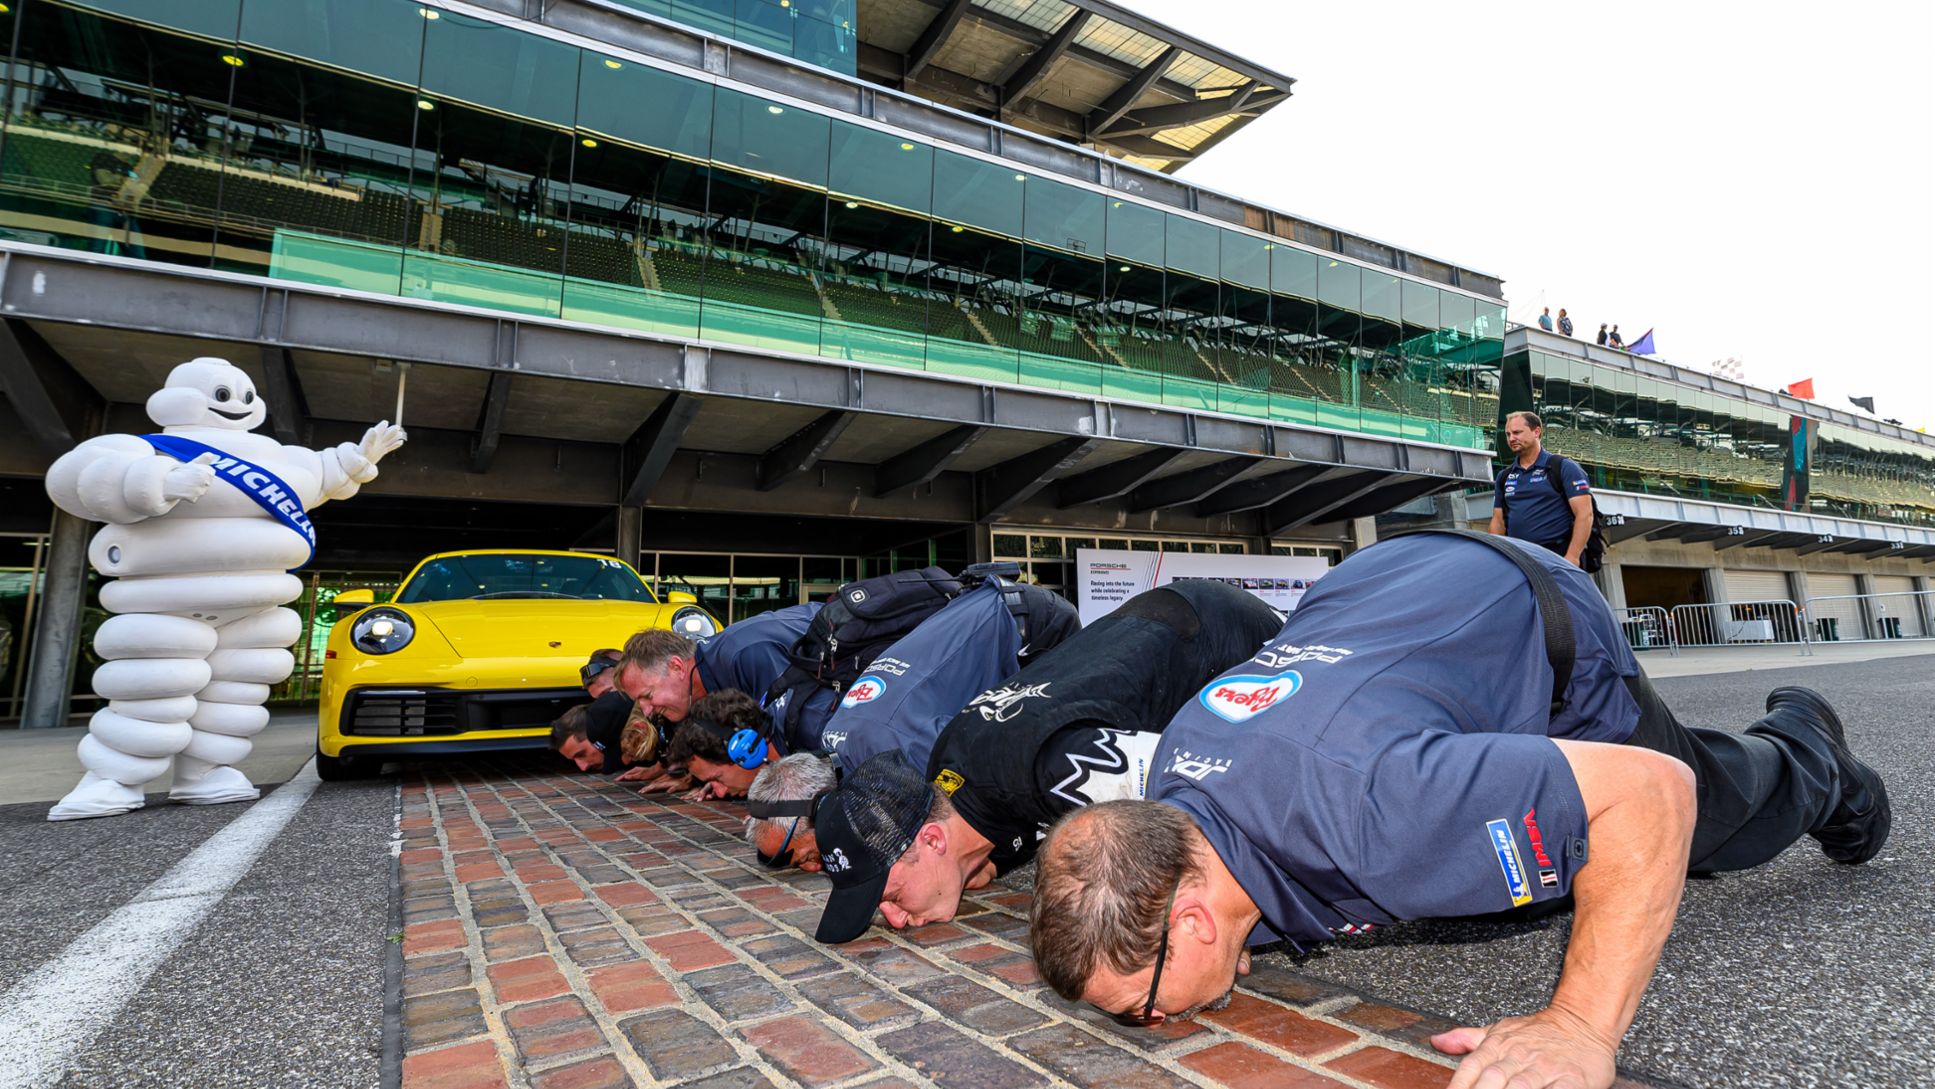 Porsche 911 GT3 Cup - No. 9 JDX Racing - Parker Thompson (CAN) and JDX Racing - Race 2 Celebration, Kissing the Bricks, Indianapolis Motor Speedway, Speedway, Indiana, USA, 2021, PCNA